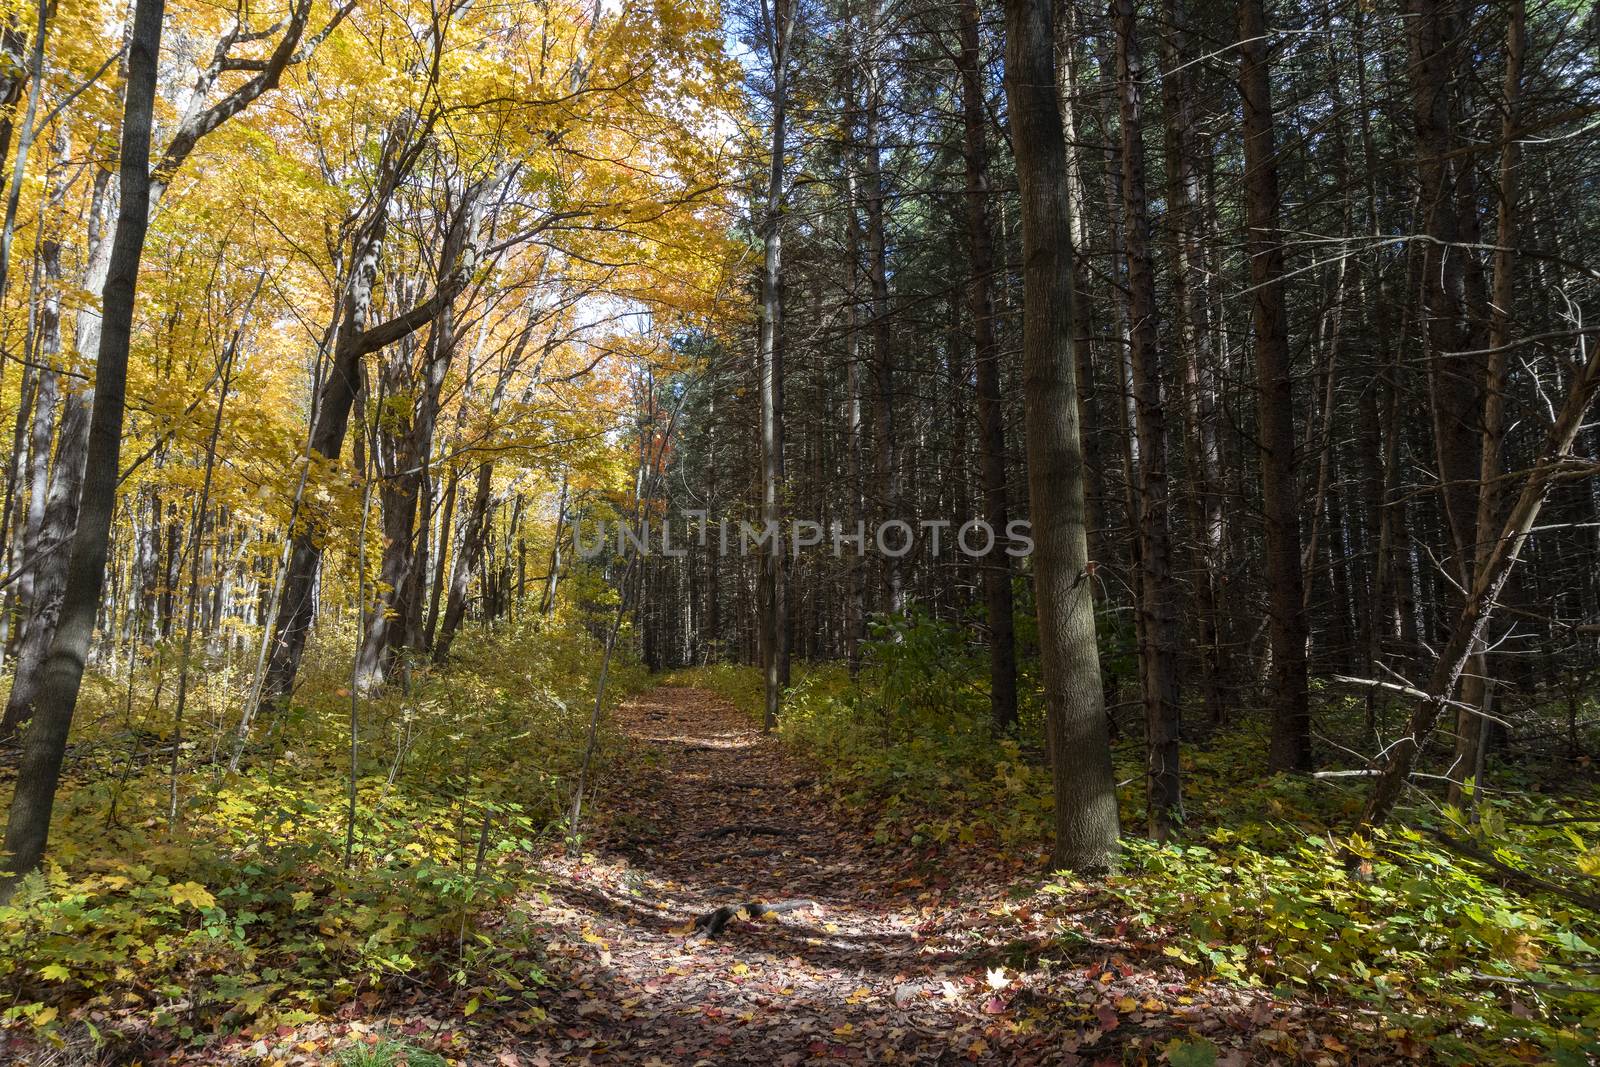 The trail along which the section between the maple forest and the pine forest passes